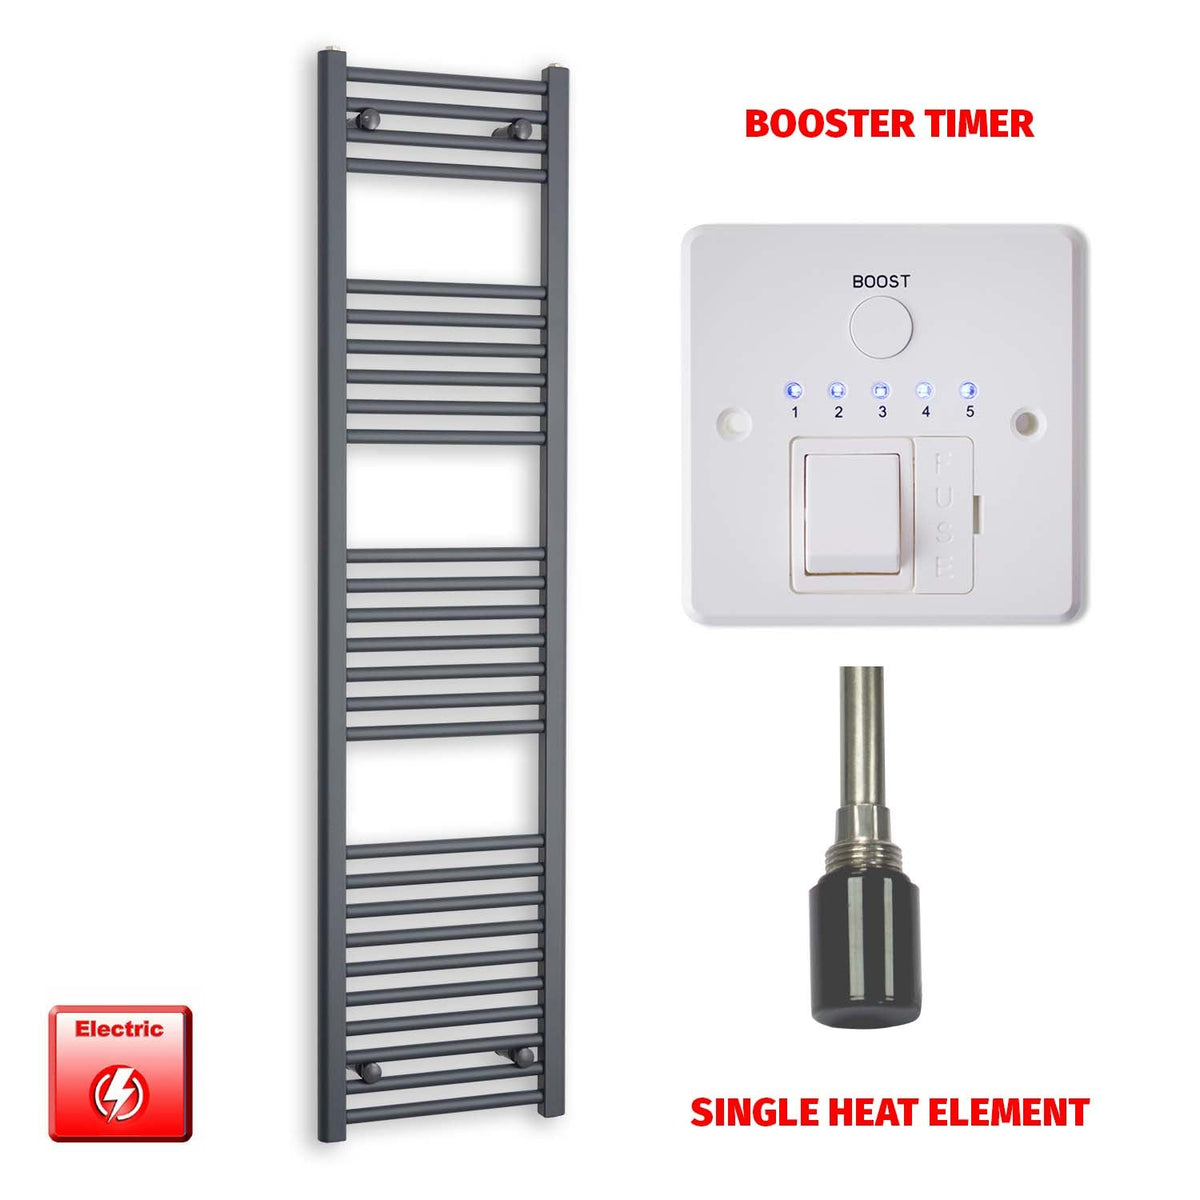 1600mm High 400mm Wide Flat Anthracite Pre-Filled Electric Heated Towel Radiator HTR Single heat element Booster timer